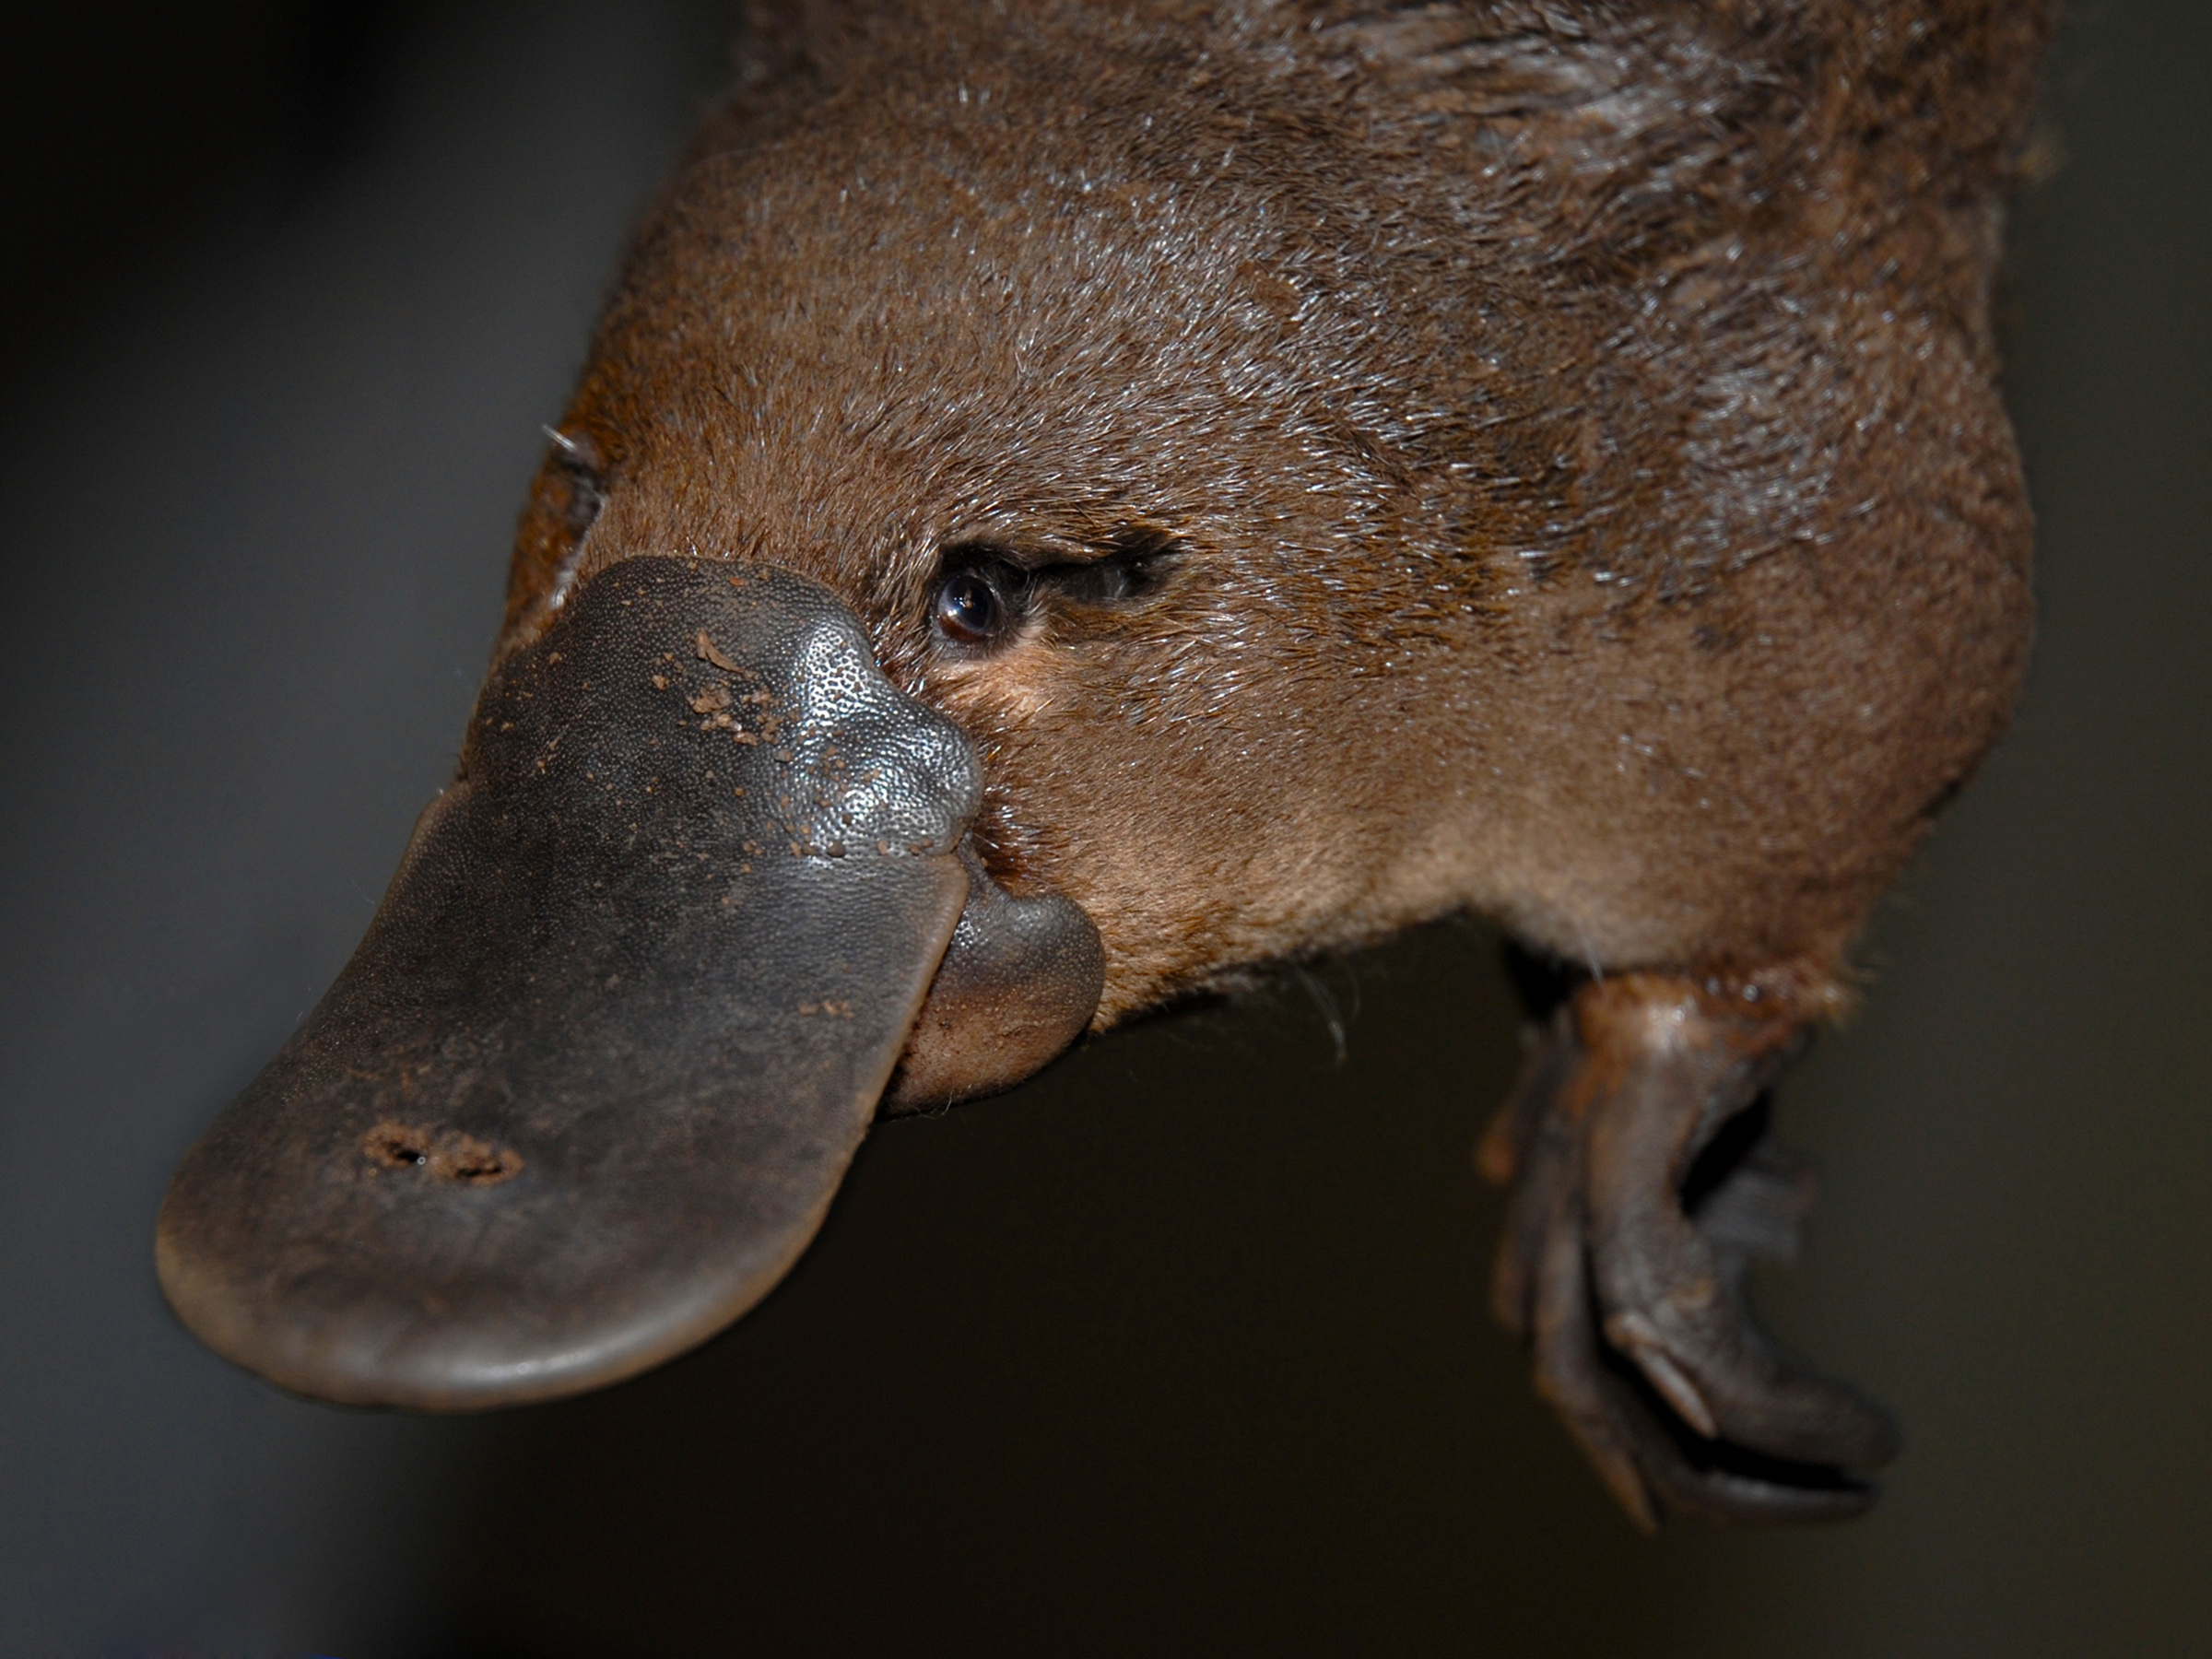 Images of Platypus | 2400x1800